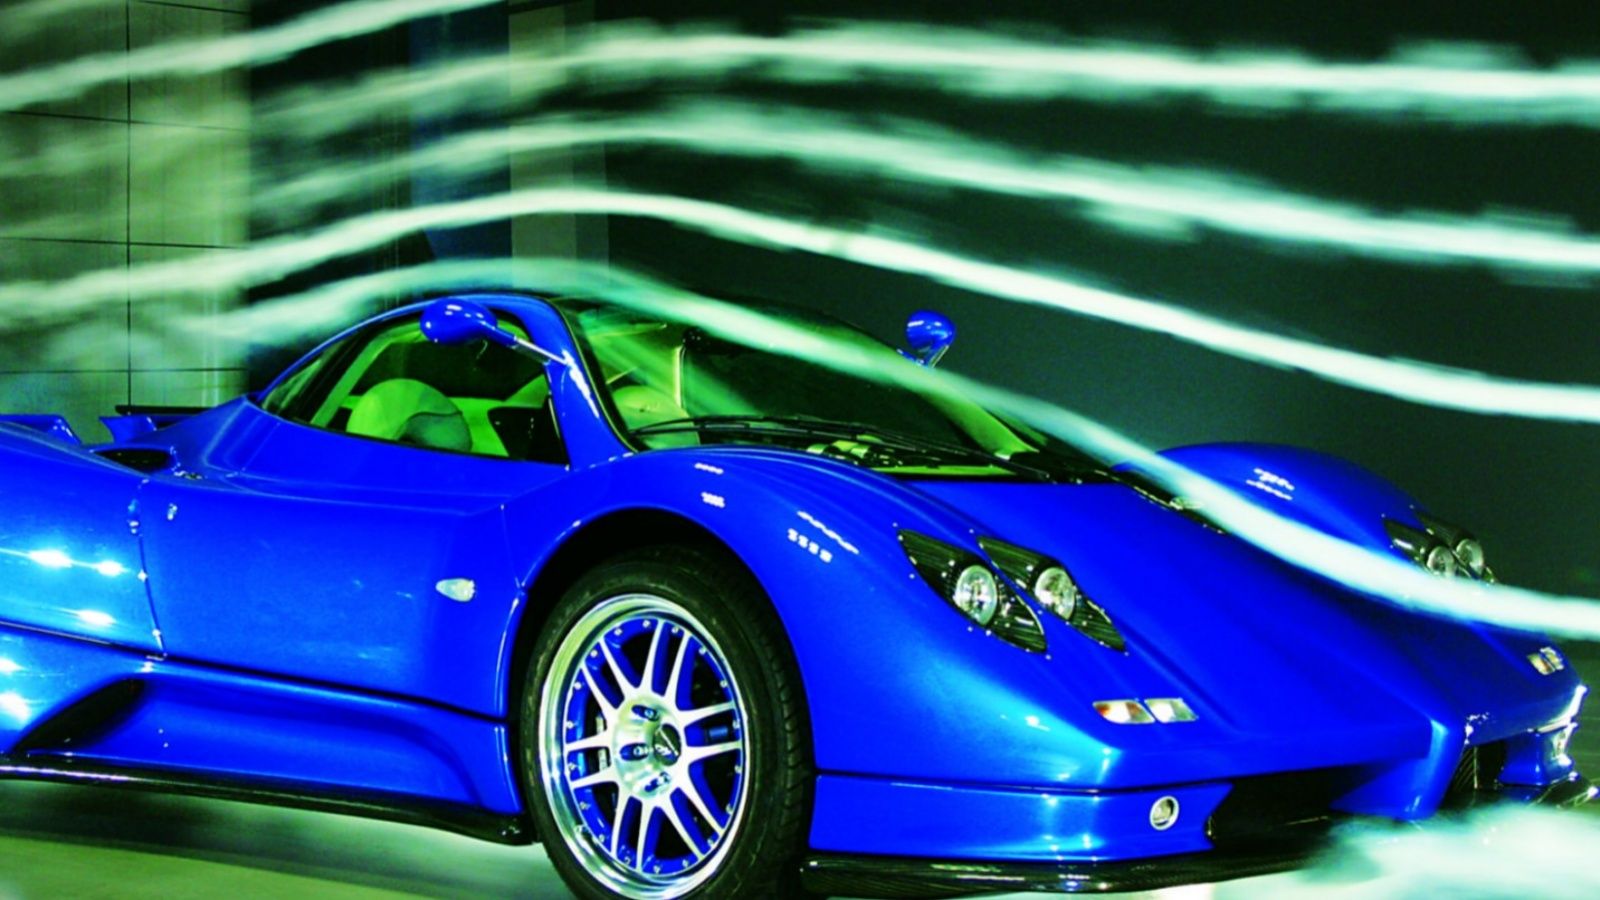 A shot of the Pagani Zonda S on a wind tunnel